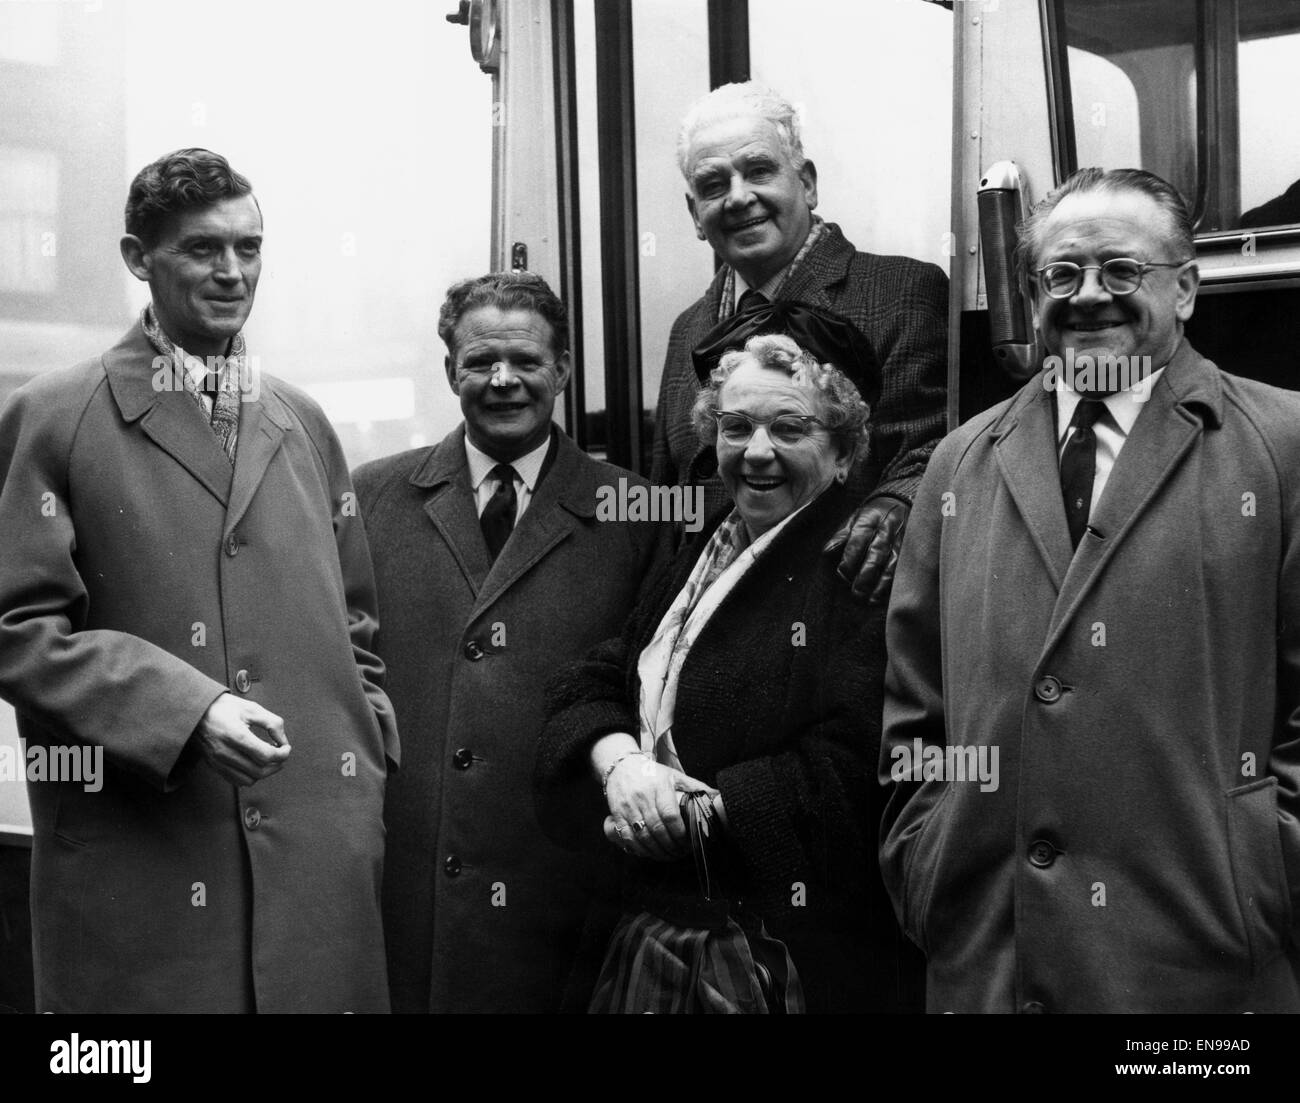 5 Labour MPs leave St Enoch Air Terminal November 1964. Left to RightL Hugh Brown, J Robertson, A Manuel, Alice Cullen, J Dempsey. Mrs Alice Cullen (18 March 1891 Ð 31 May 1969), born Alice McLaughlin, was a Scottish Labour Party politician & won the Labo Stock Photo